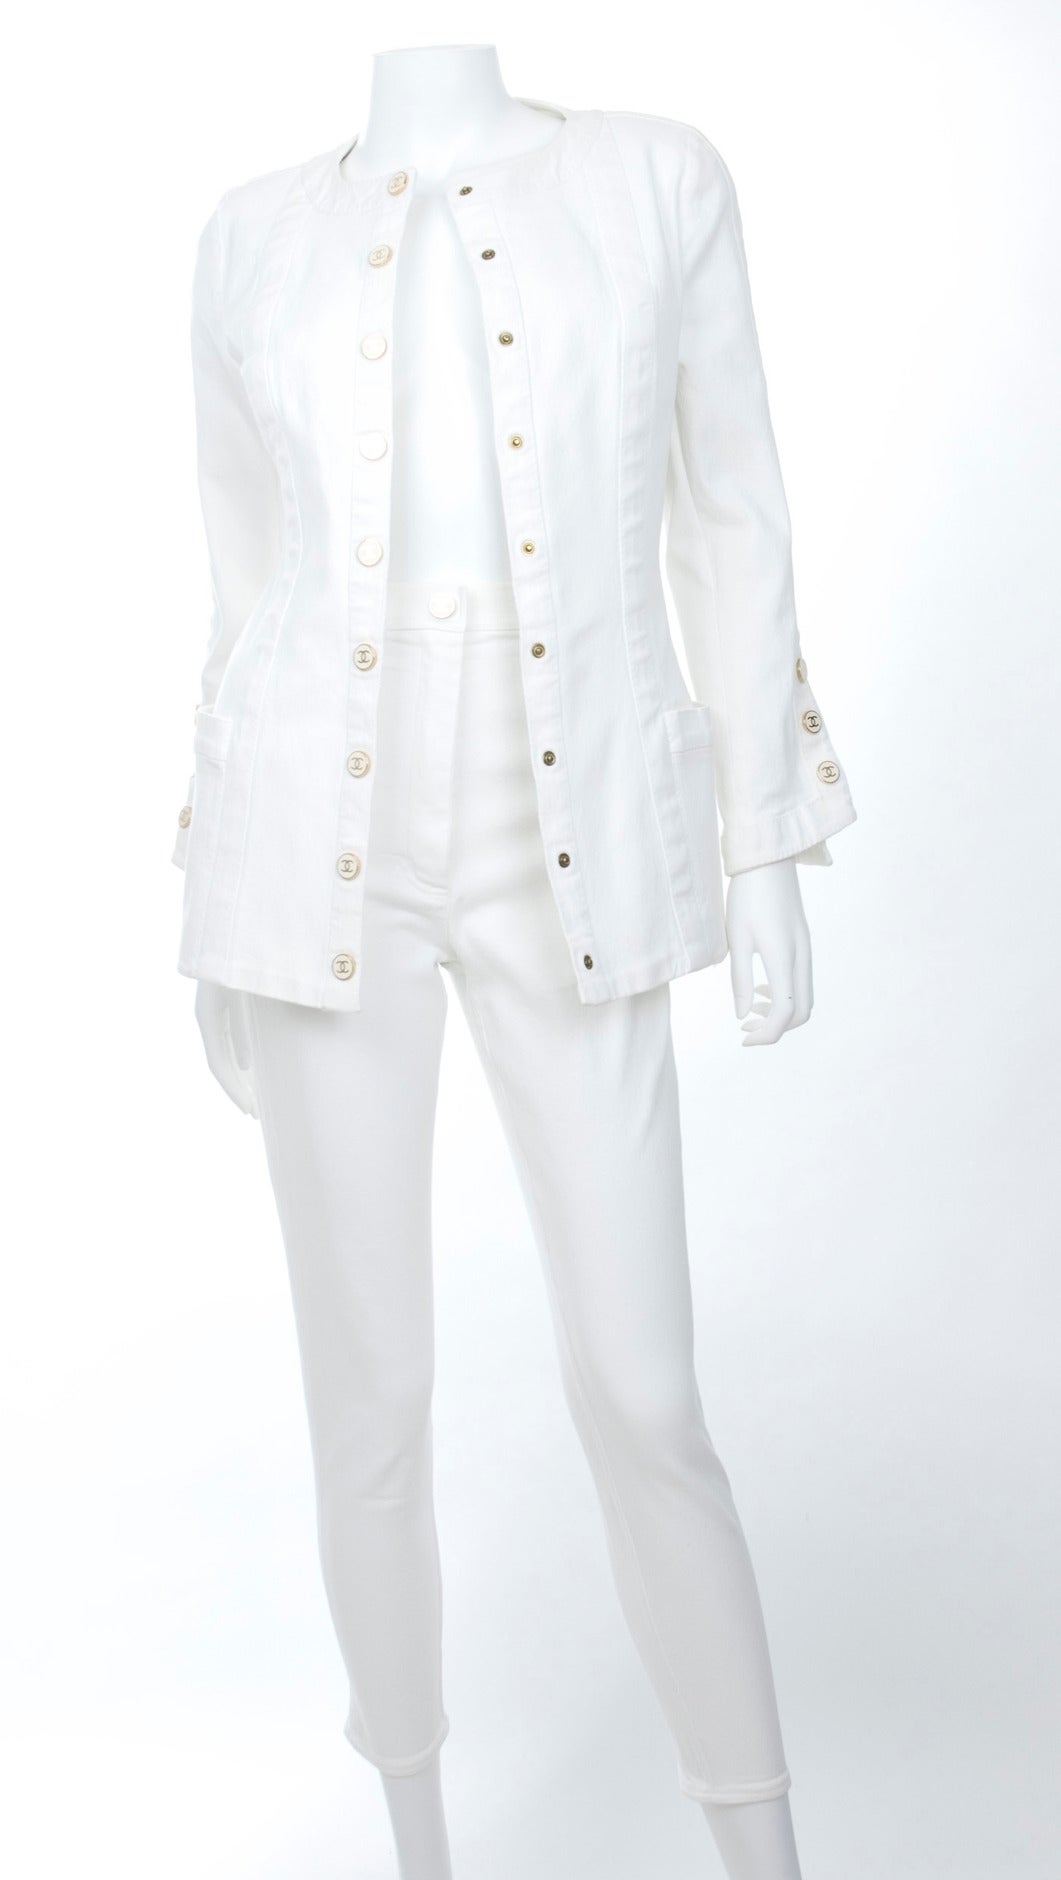 1990s Chanel White Jeans Suit with logo snap closure.
White jeans fabric with elasthan.
Size label is missing.
Perfect condition - professional washed and pressed.

Measurements:
Jacket length 26